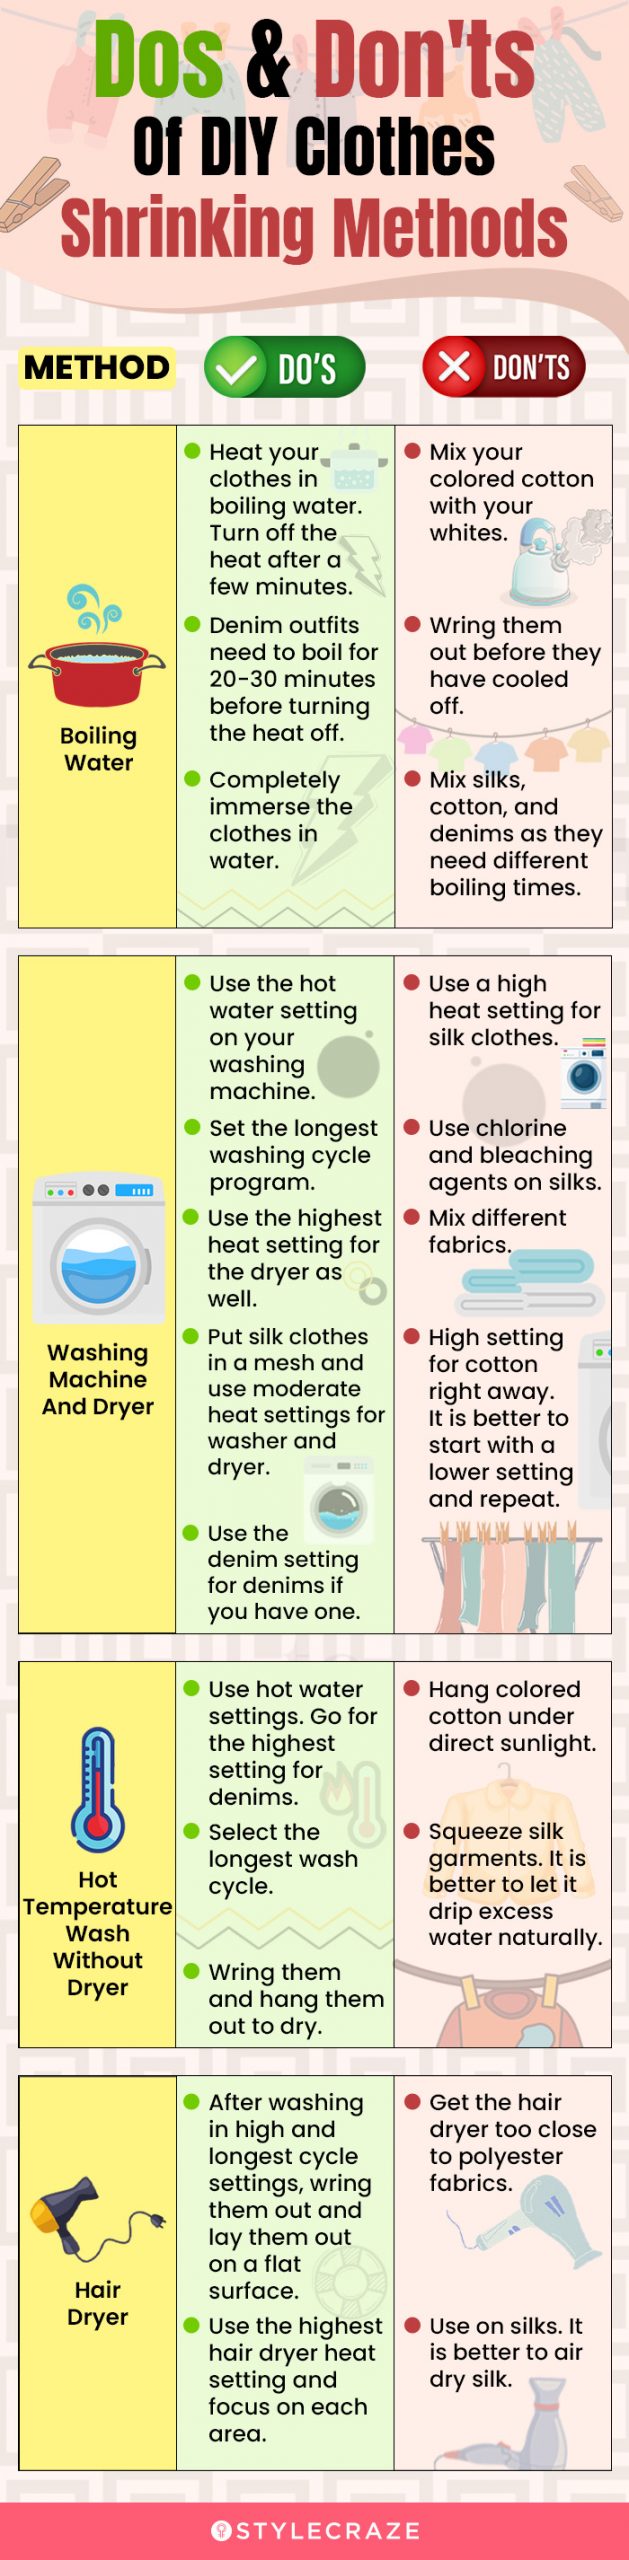 dos & don'ts of diy clothes shrinking methods (infographic)